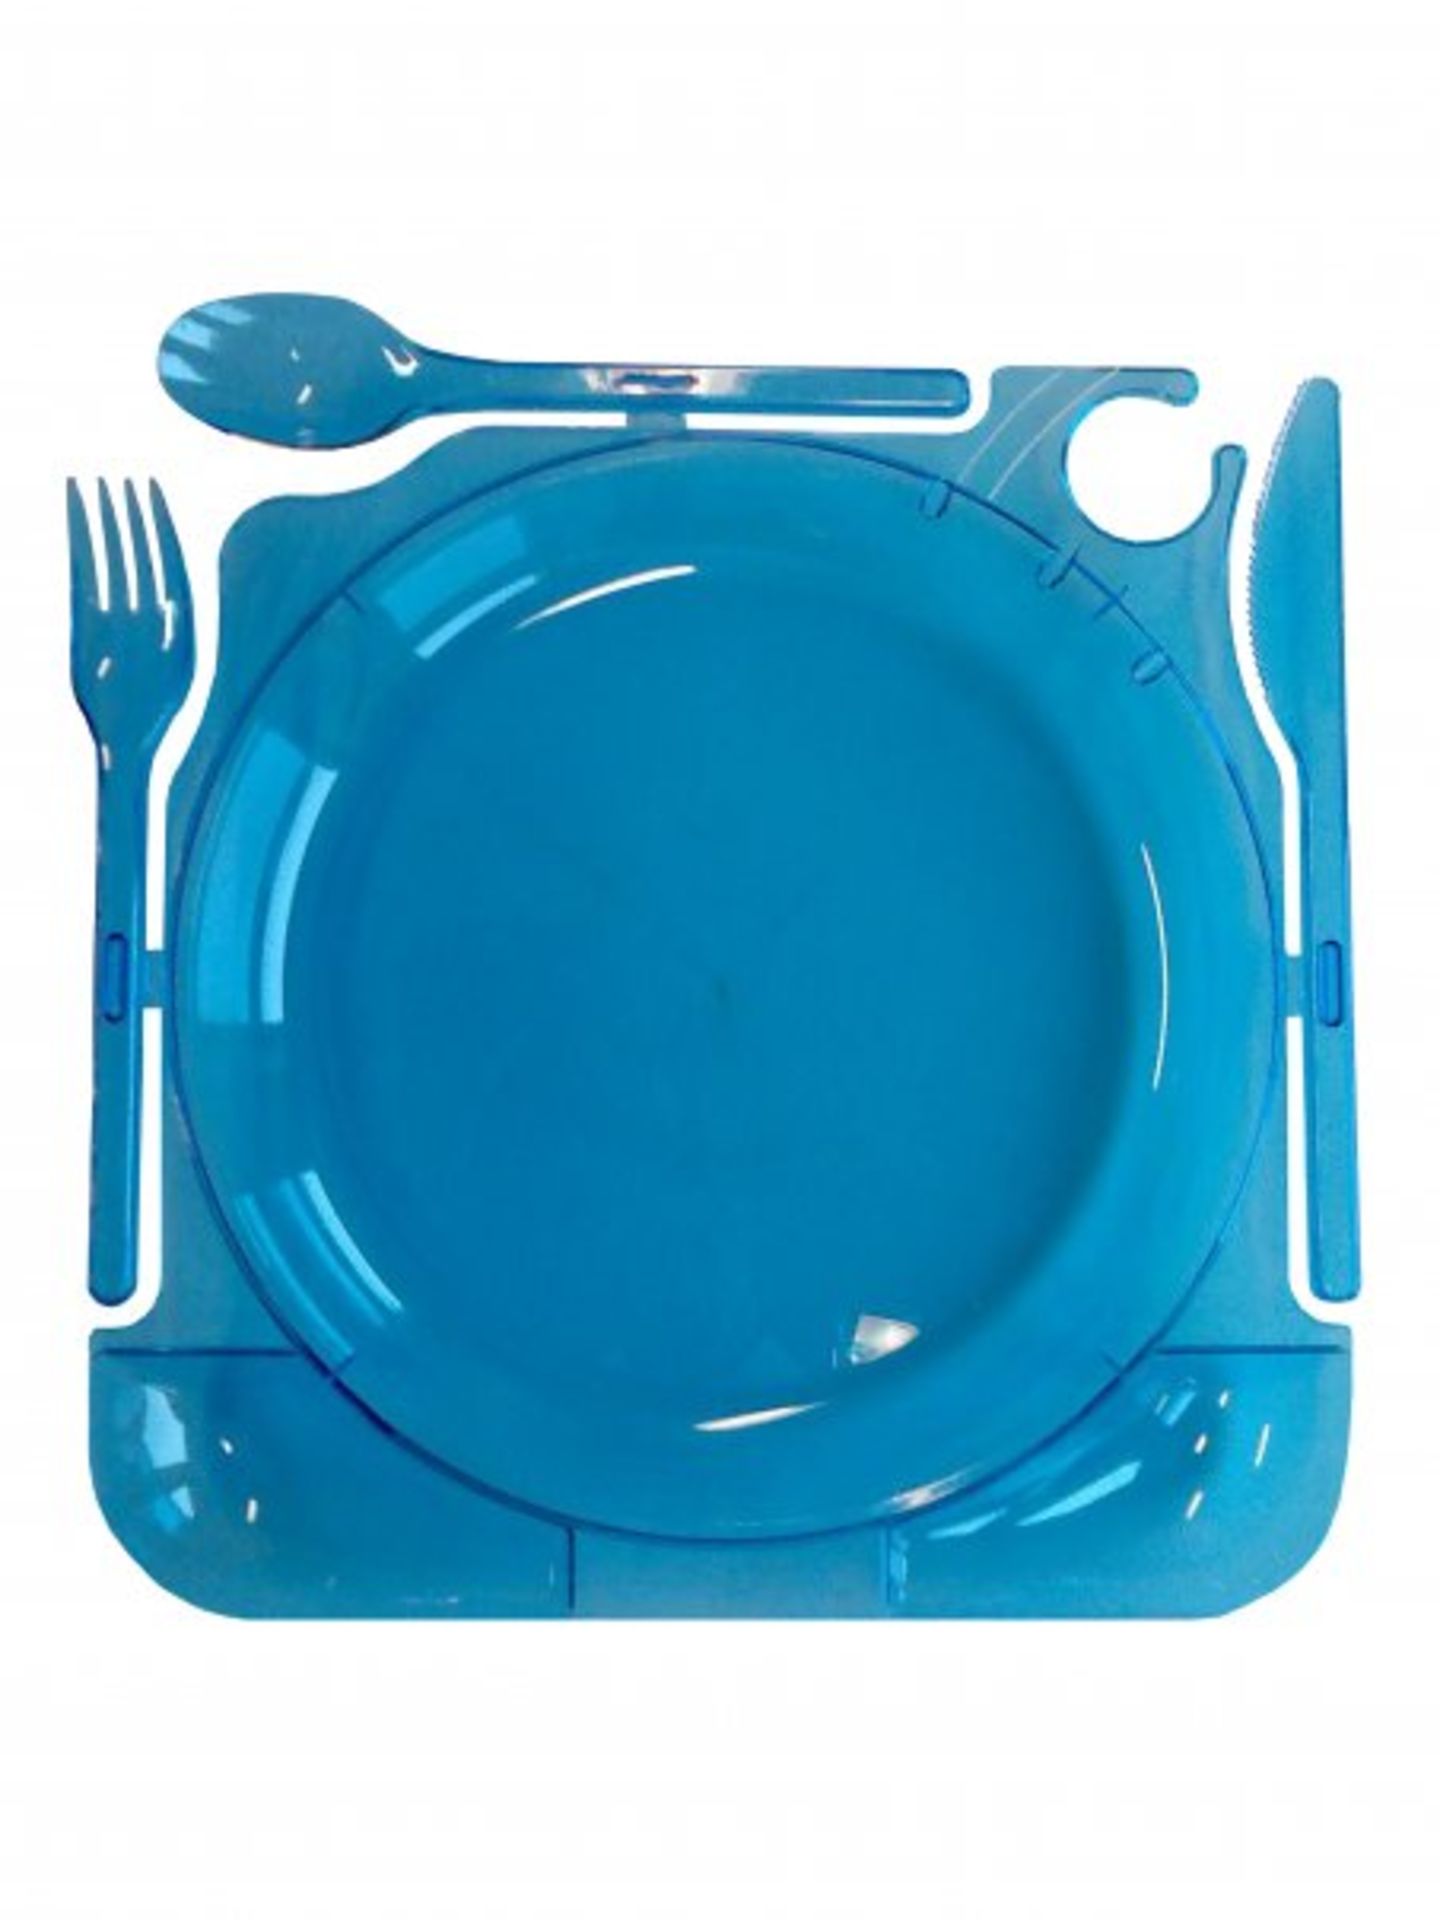 100pcs Bulk Pack Caterplate -BLUE COLOUR Contains all in one plate knife fork spoon -